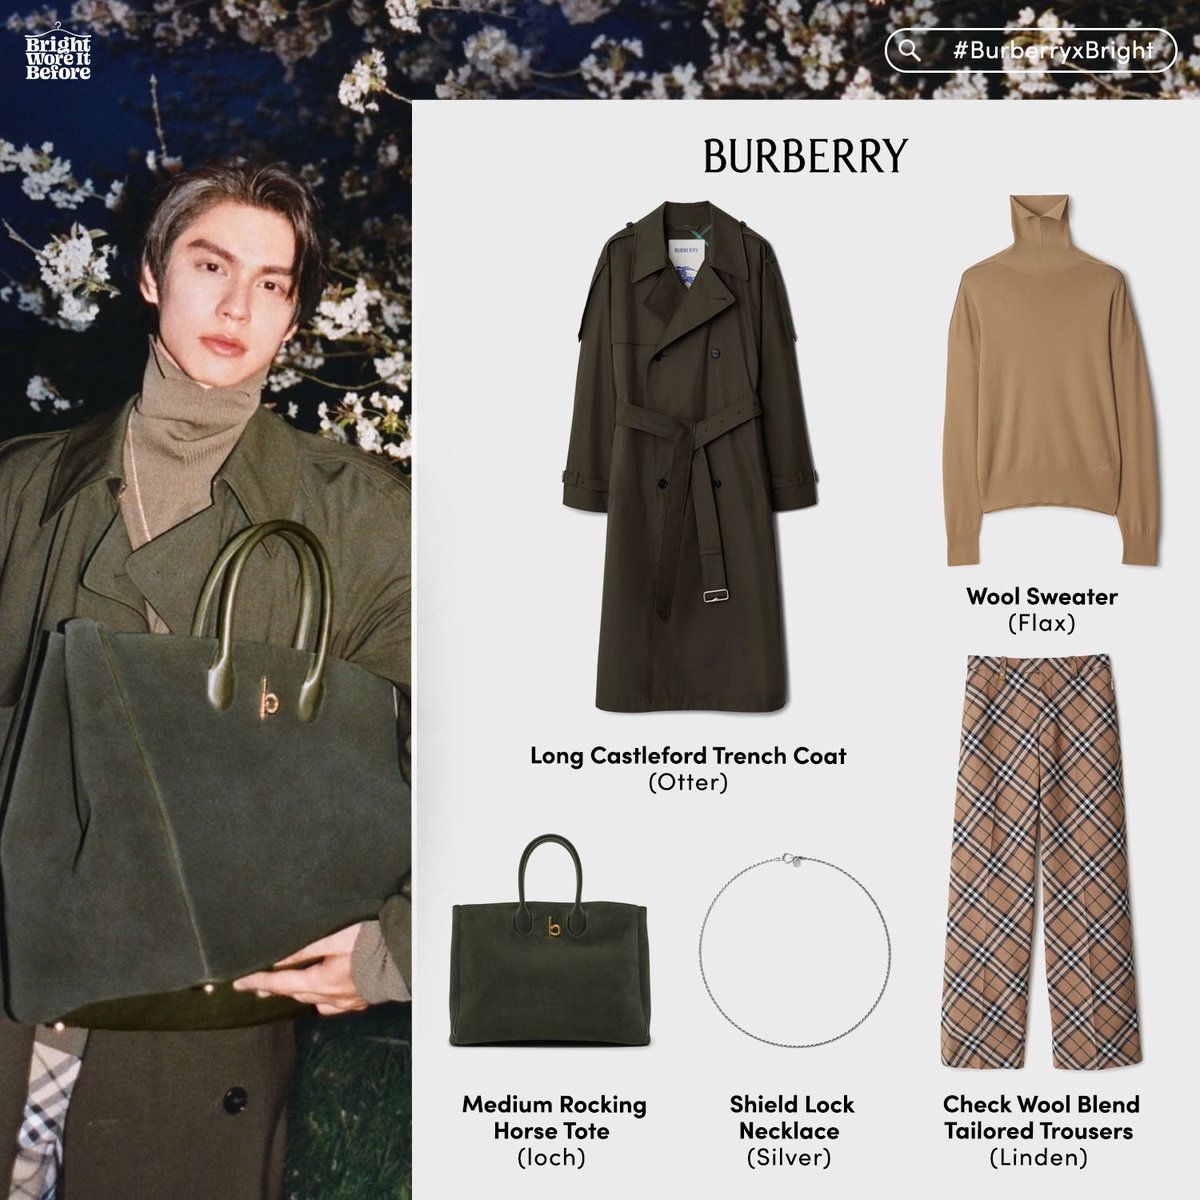 ◆◇ All @Burberry ◇◆

👕 Wool Sweater (Flax)
🛒 £820 (38,081 THB) 

🥼 Long Castleford Trench Coat (Otter)
🛒 £2,190 (101,705 THB)

📿 Shield Lock Necklace (Silver)
🛒 £430 (19,969 THB)

👜 Medium Rocking Horse Tote (Loch)
🛒 105,000 THB 

👖 Check Wool Blend Tailored Trousers